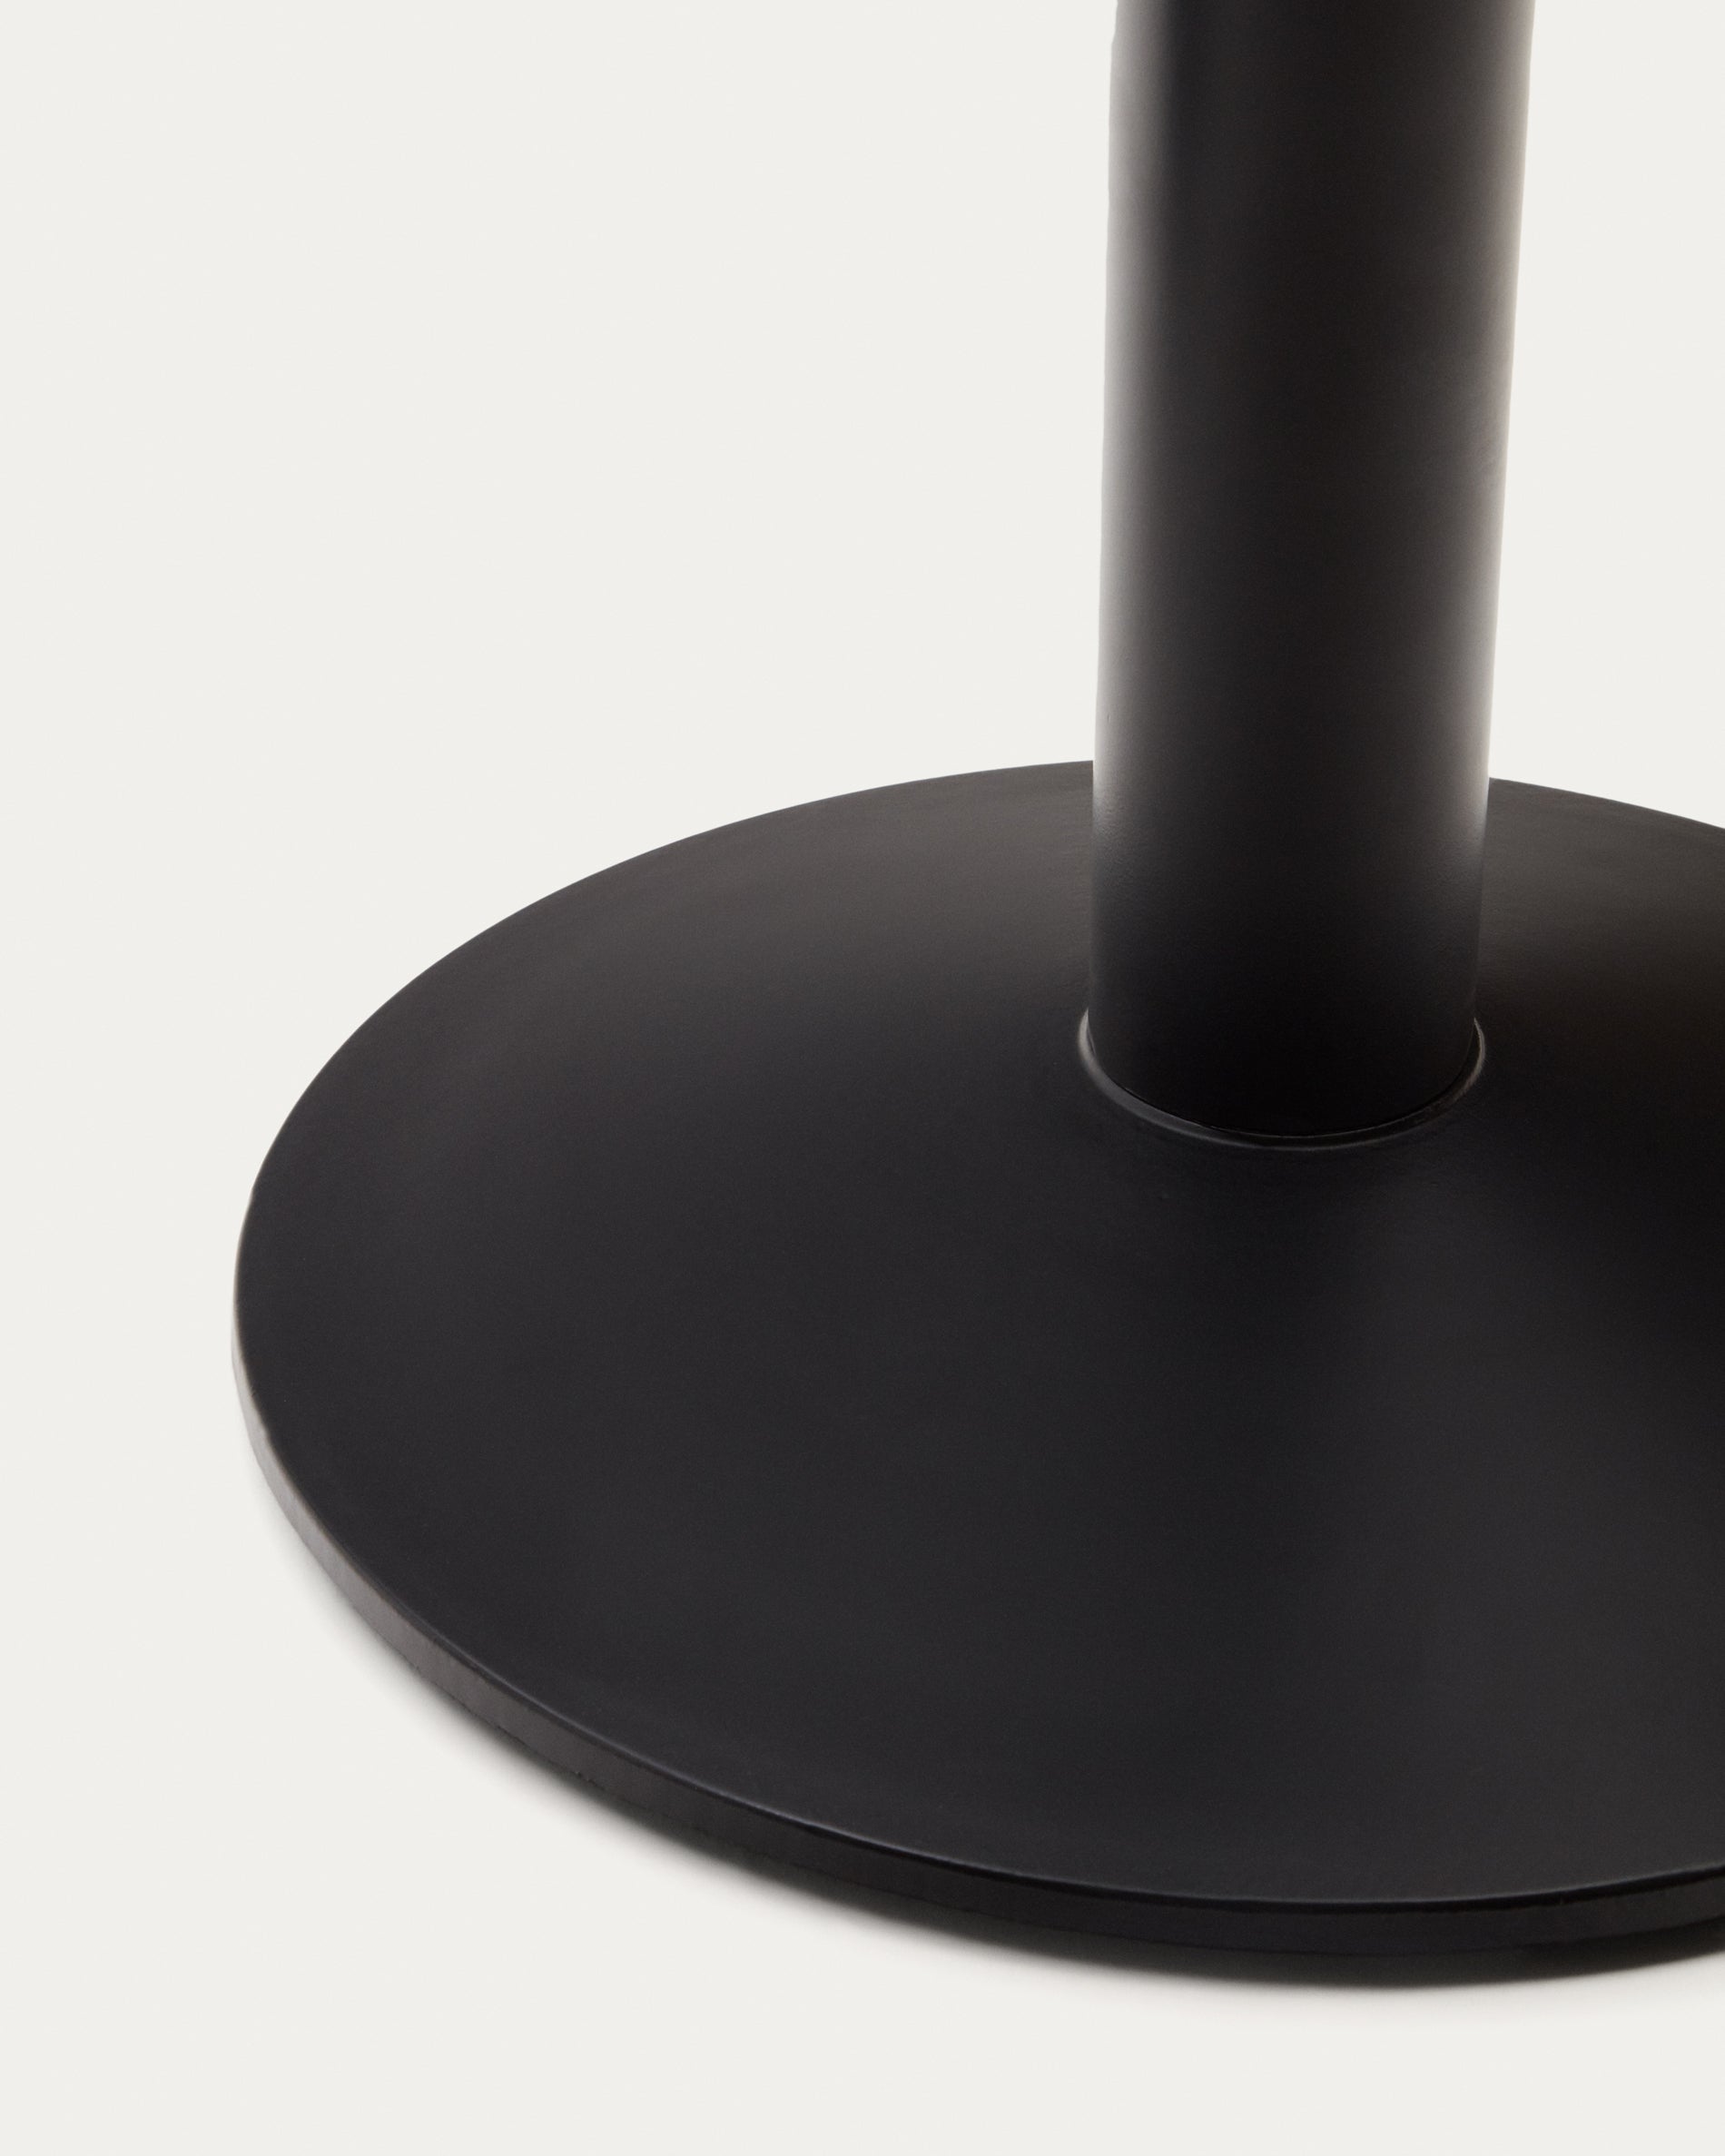 Esilda bar-table leg with large round metal base in a painted black finish